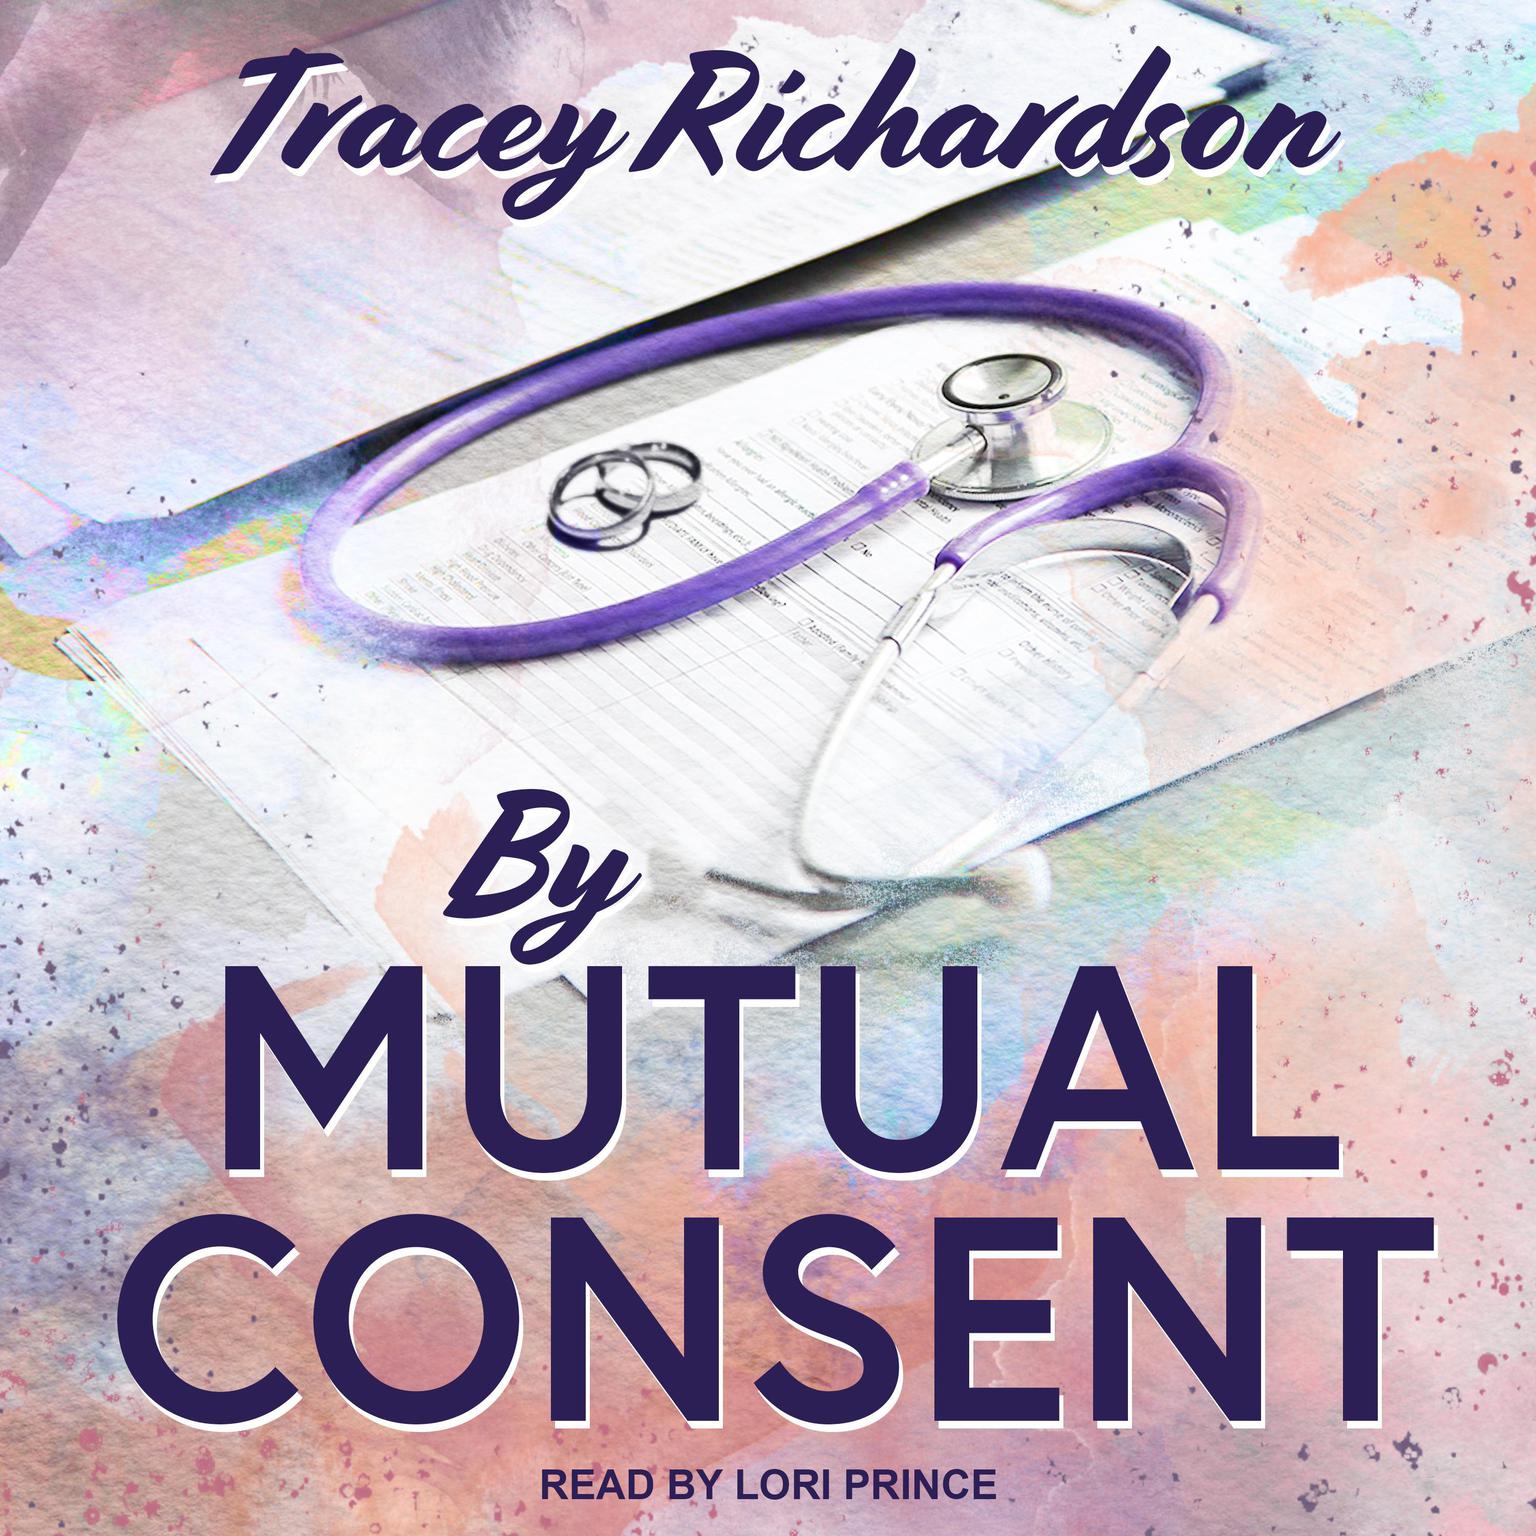 Tracey Richardson: By Mutual Consent (Paperback, 2016, Bella Books)